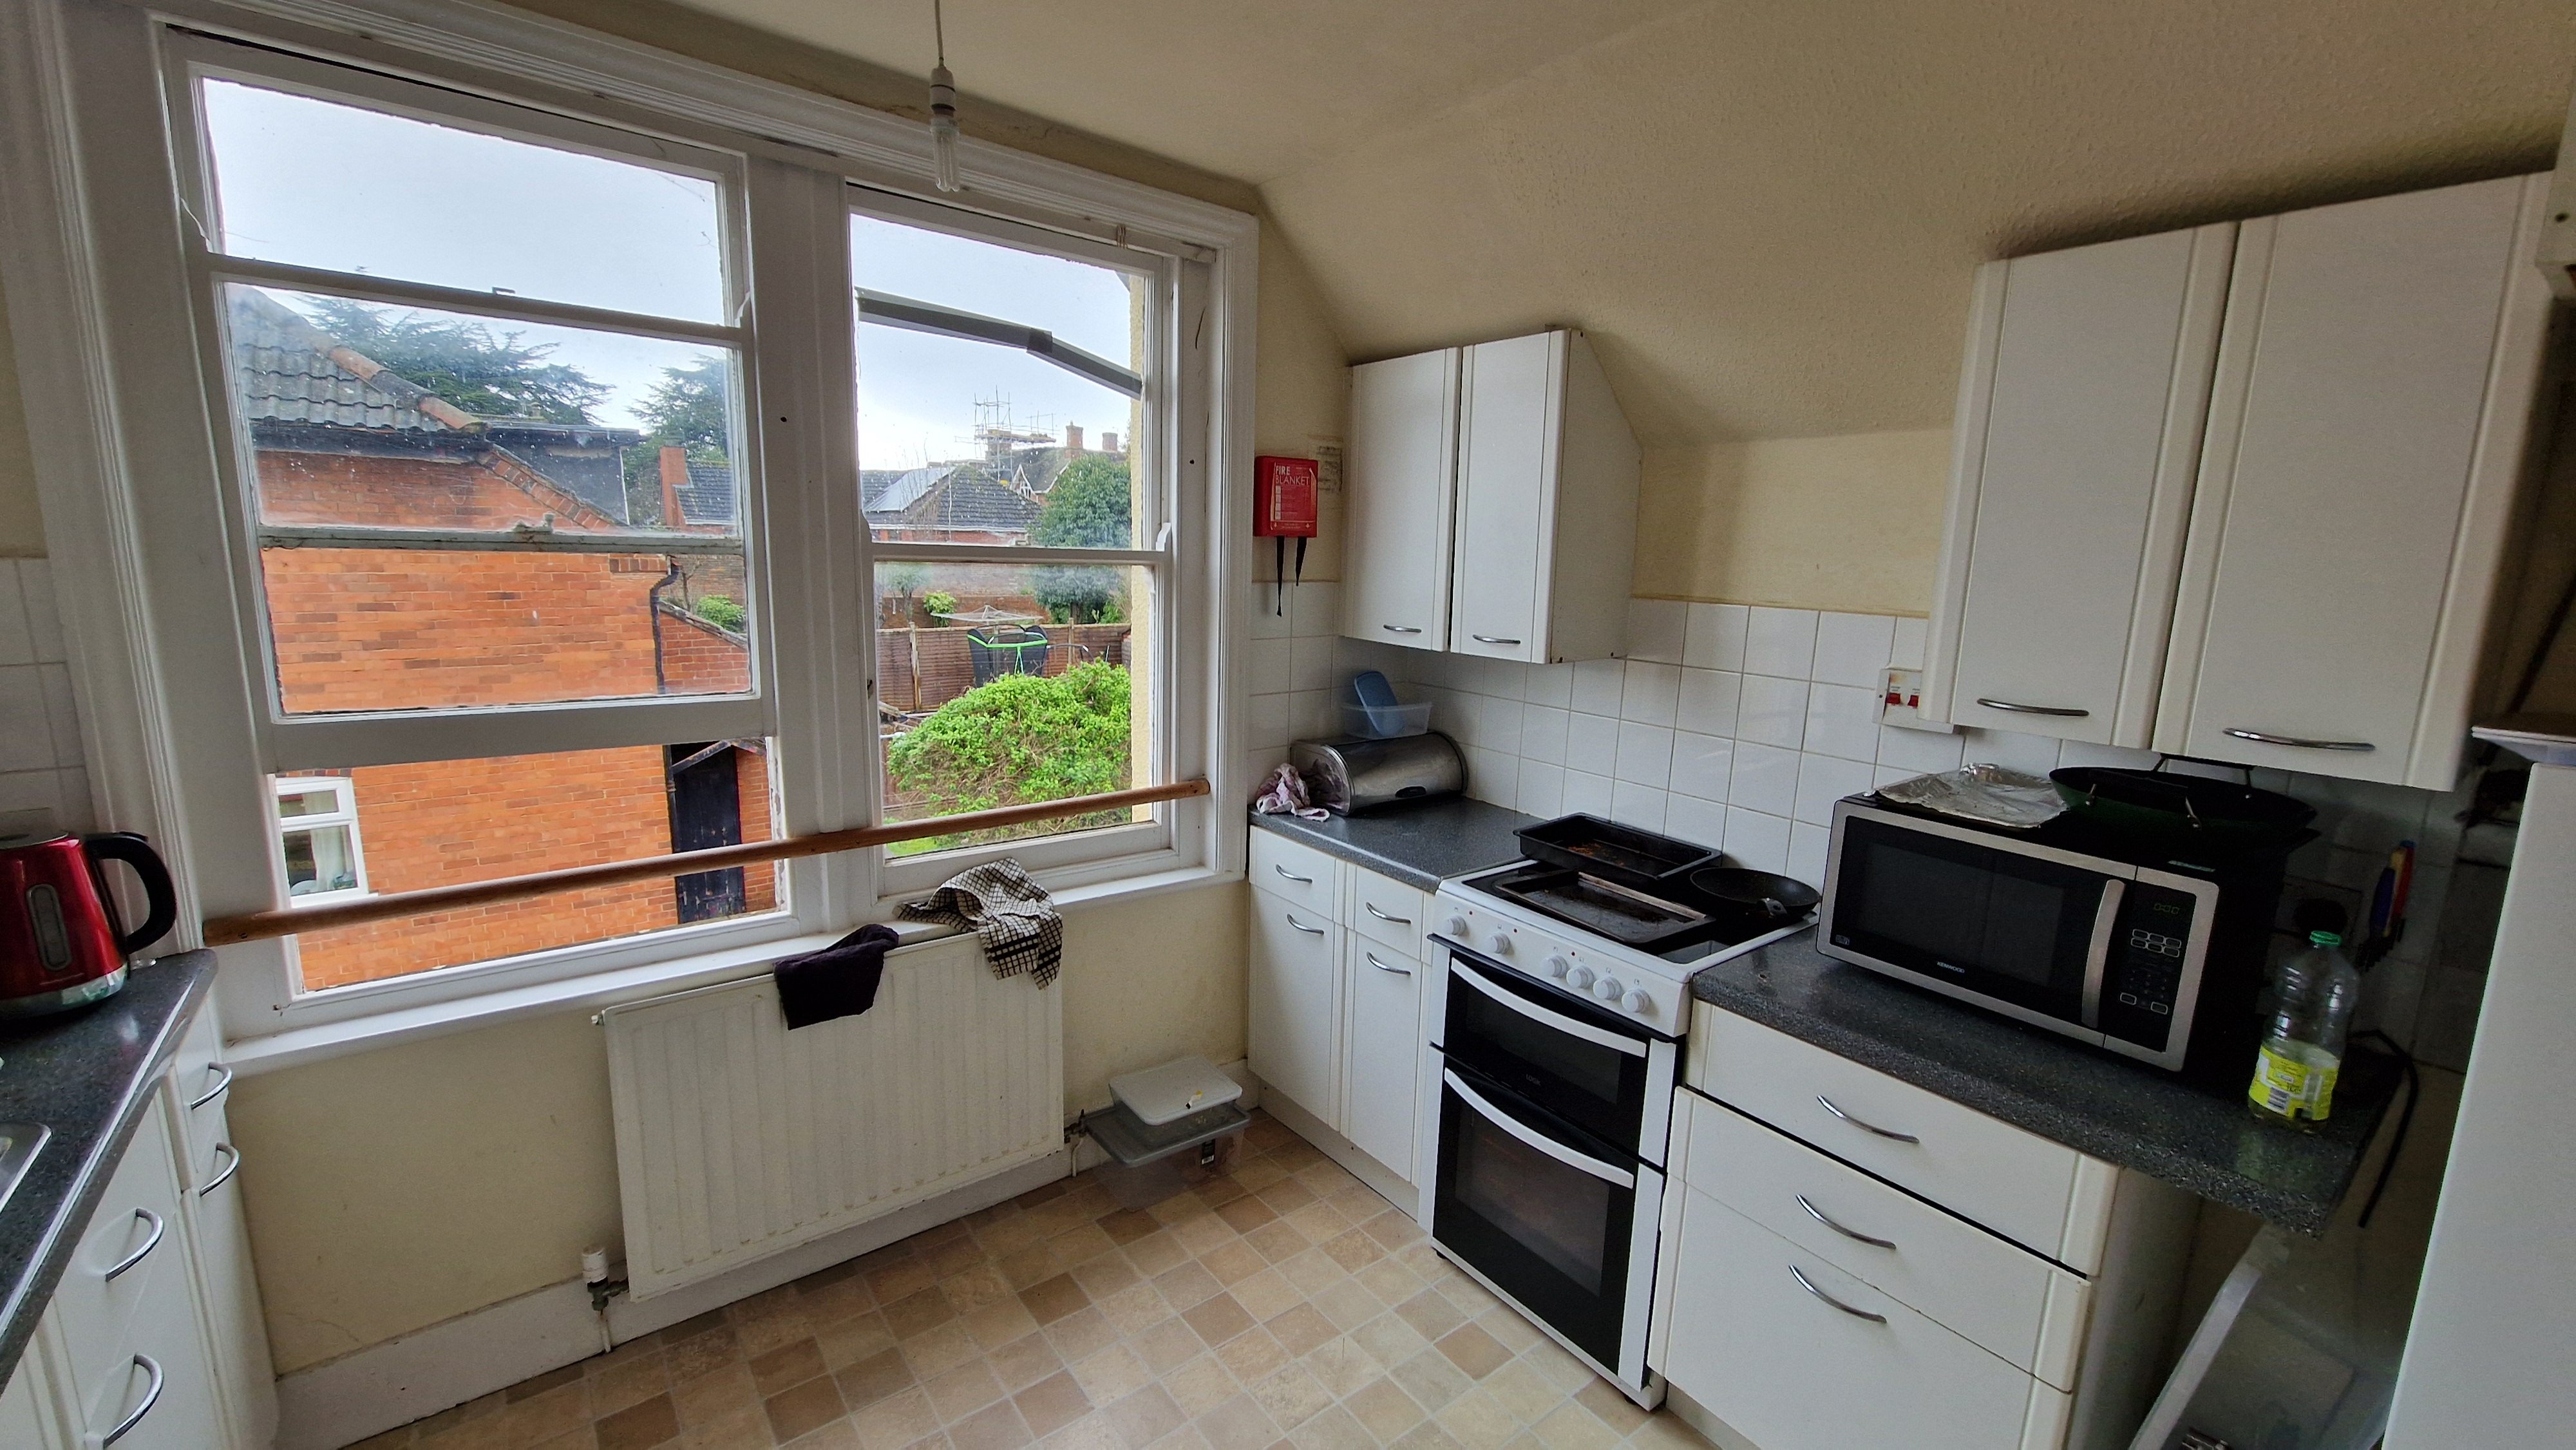 1 bed house / flat share to rent in Belvedere Road 2